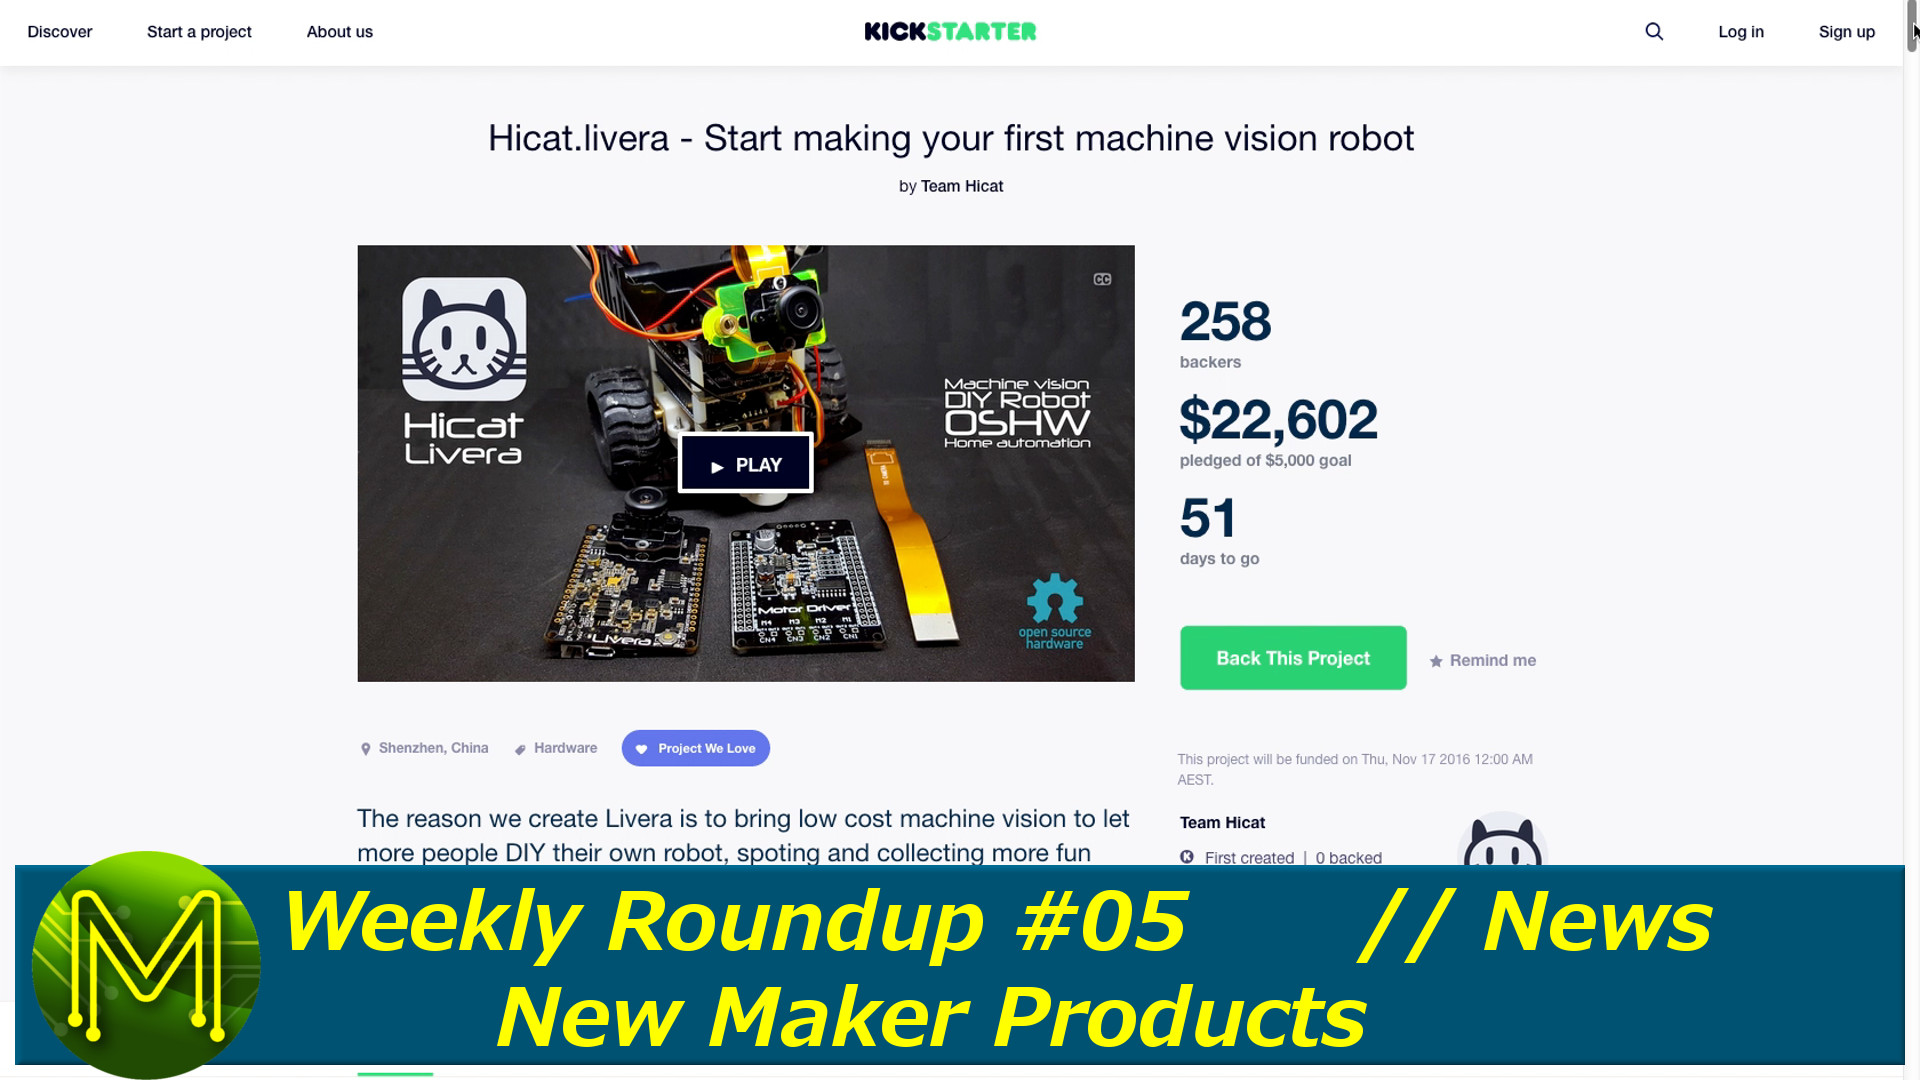 Weekly Roundup #05 - New Maker Products